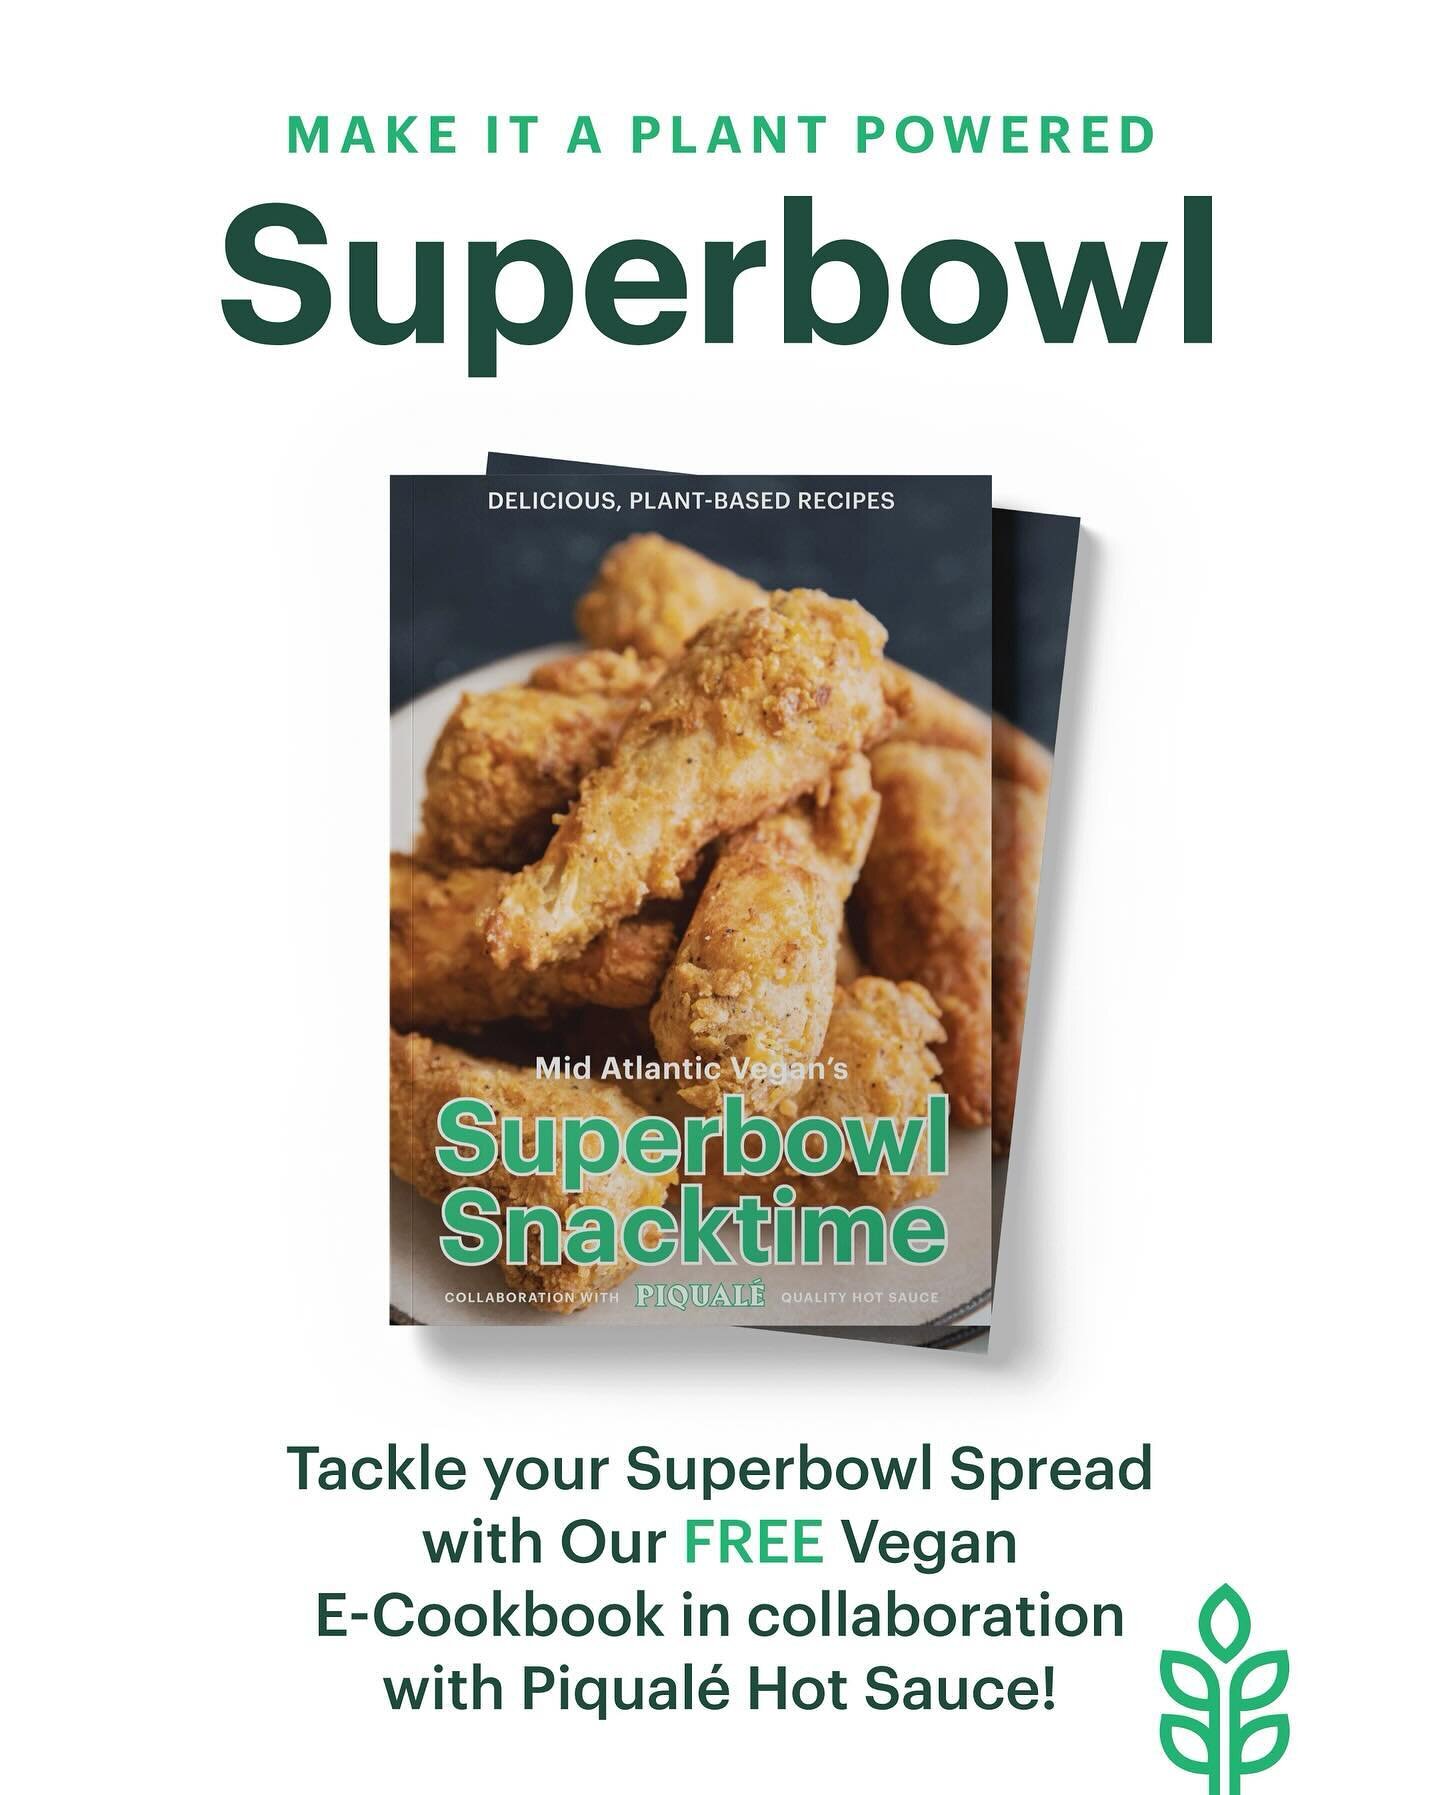 Spice up your Super Bowl spread with the perfect playbook! 

We&rsquo;ve teamed up with Piqual&eacute; Hot Sauce to bring you a FREE E-Cookbook, featuring 9 game-changing Vegan recipes that are the perfect party snacks.

These recipes are so deliciou